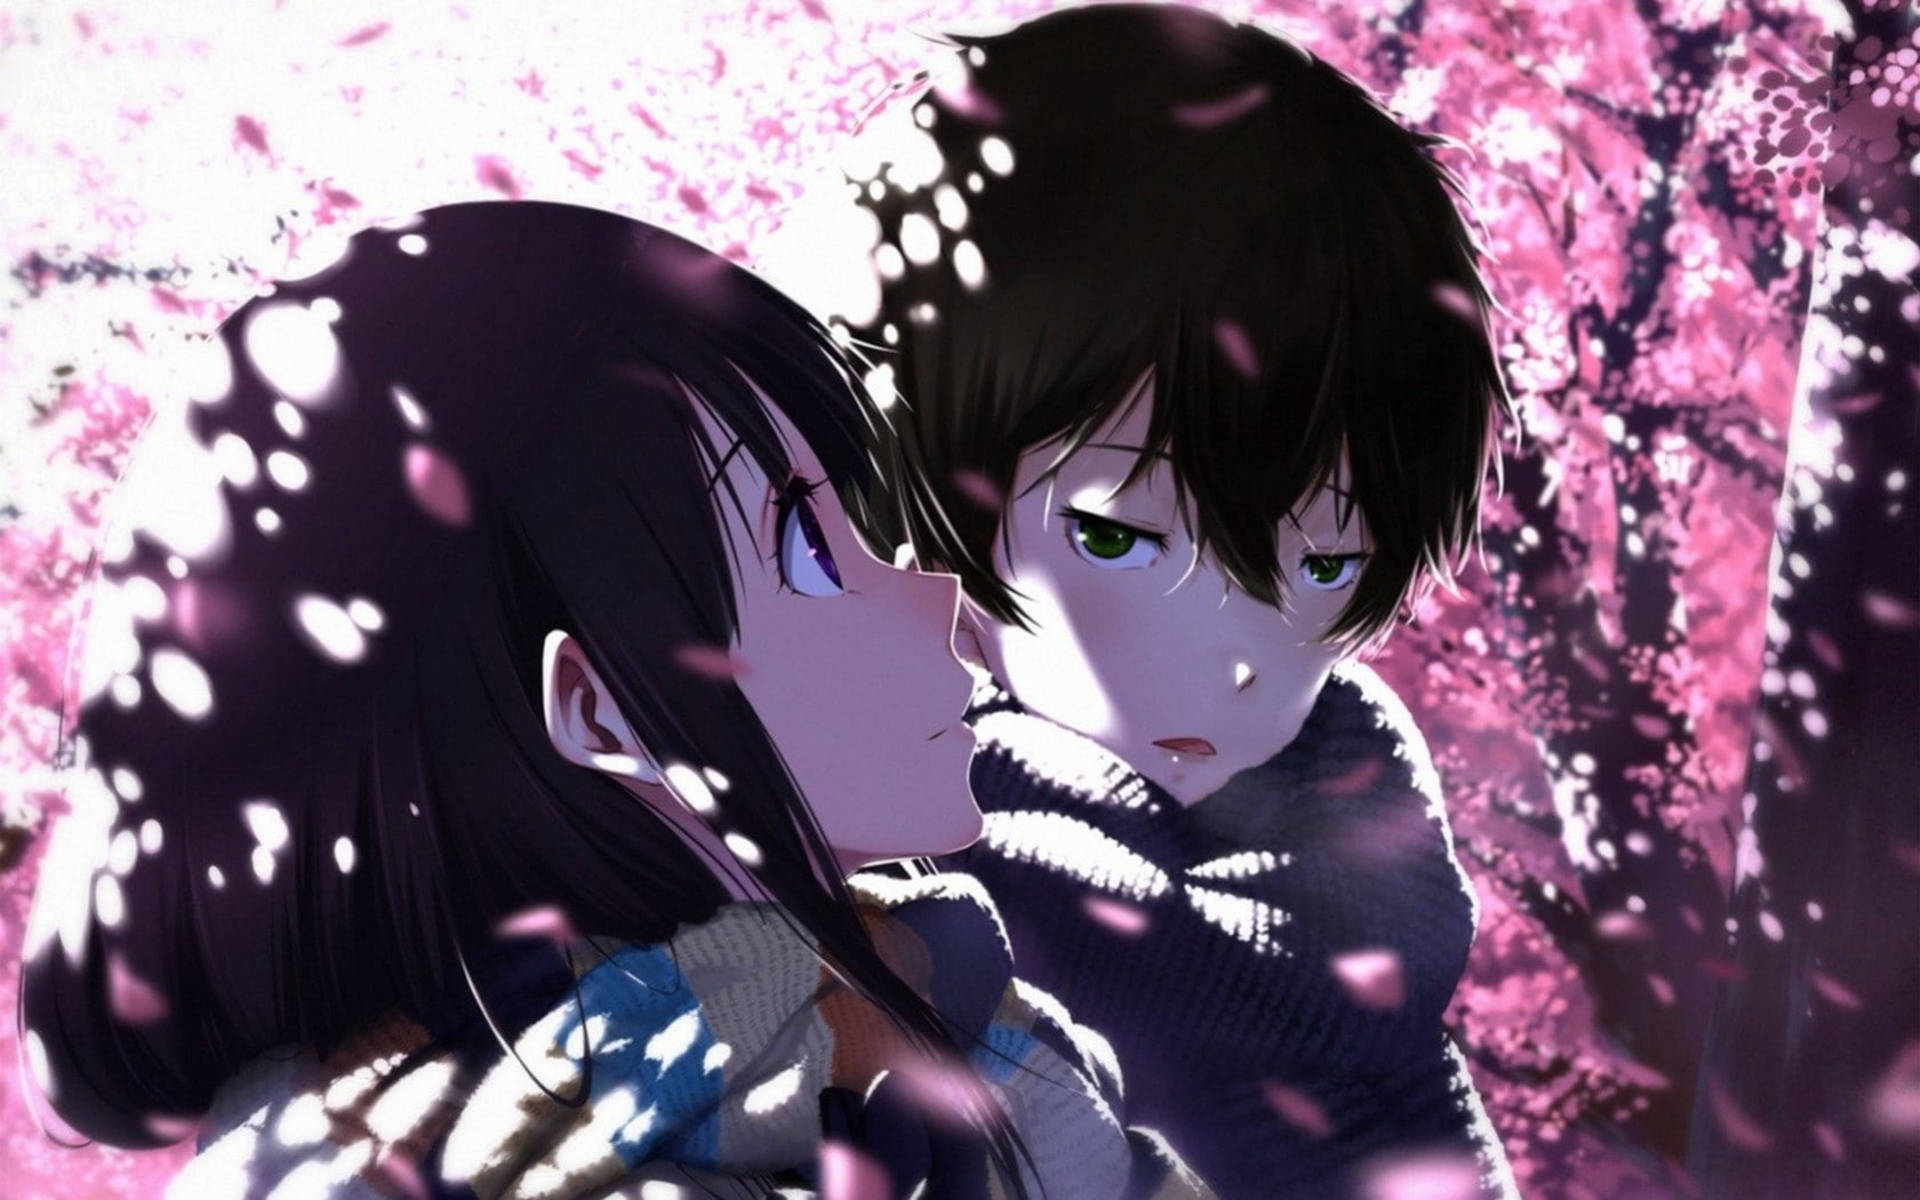 Cute Anime Couple With Cherry Blossoms